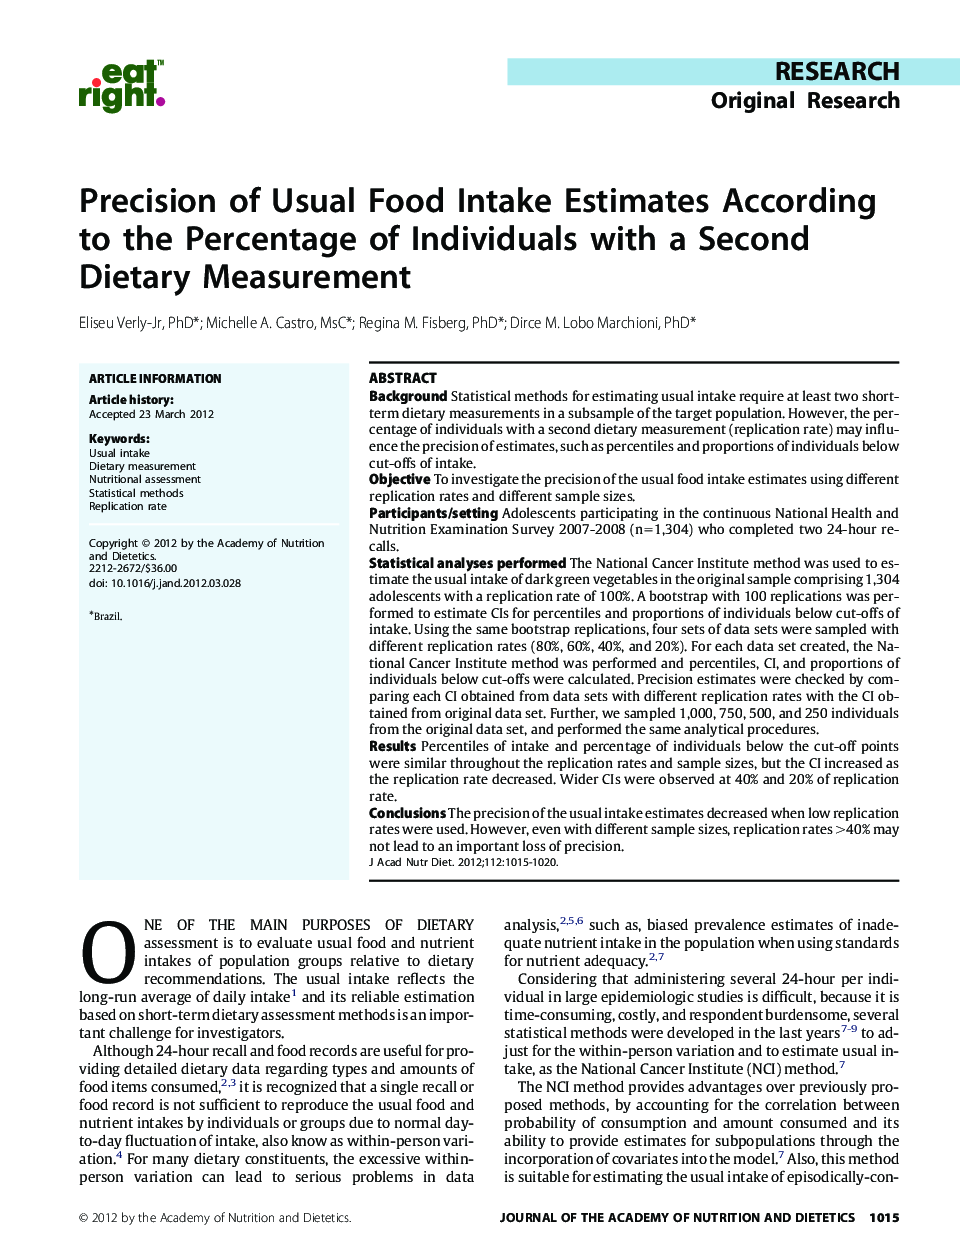 Precision of Usual Food Intake Estimates According to the Percentage of Individuals with a Second Dietary Measurement 